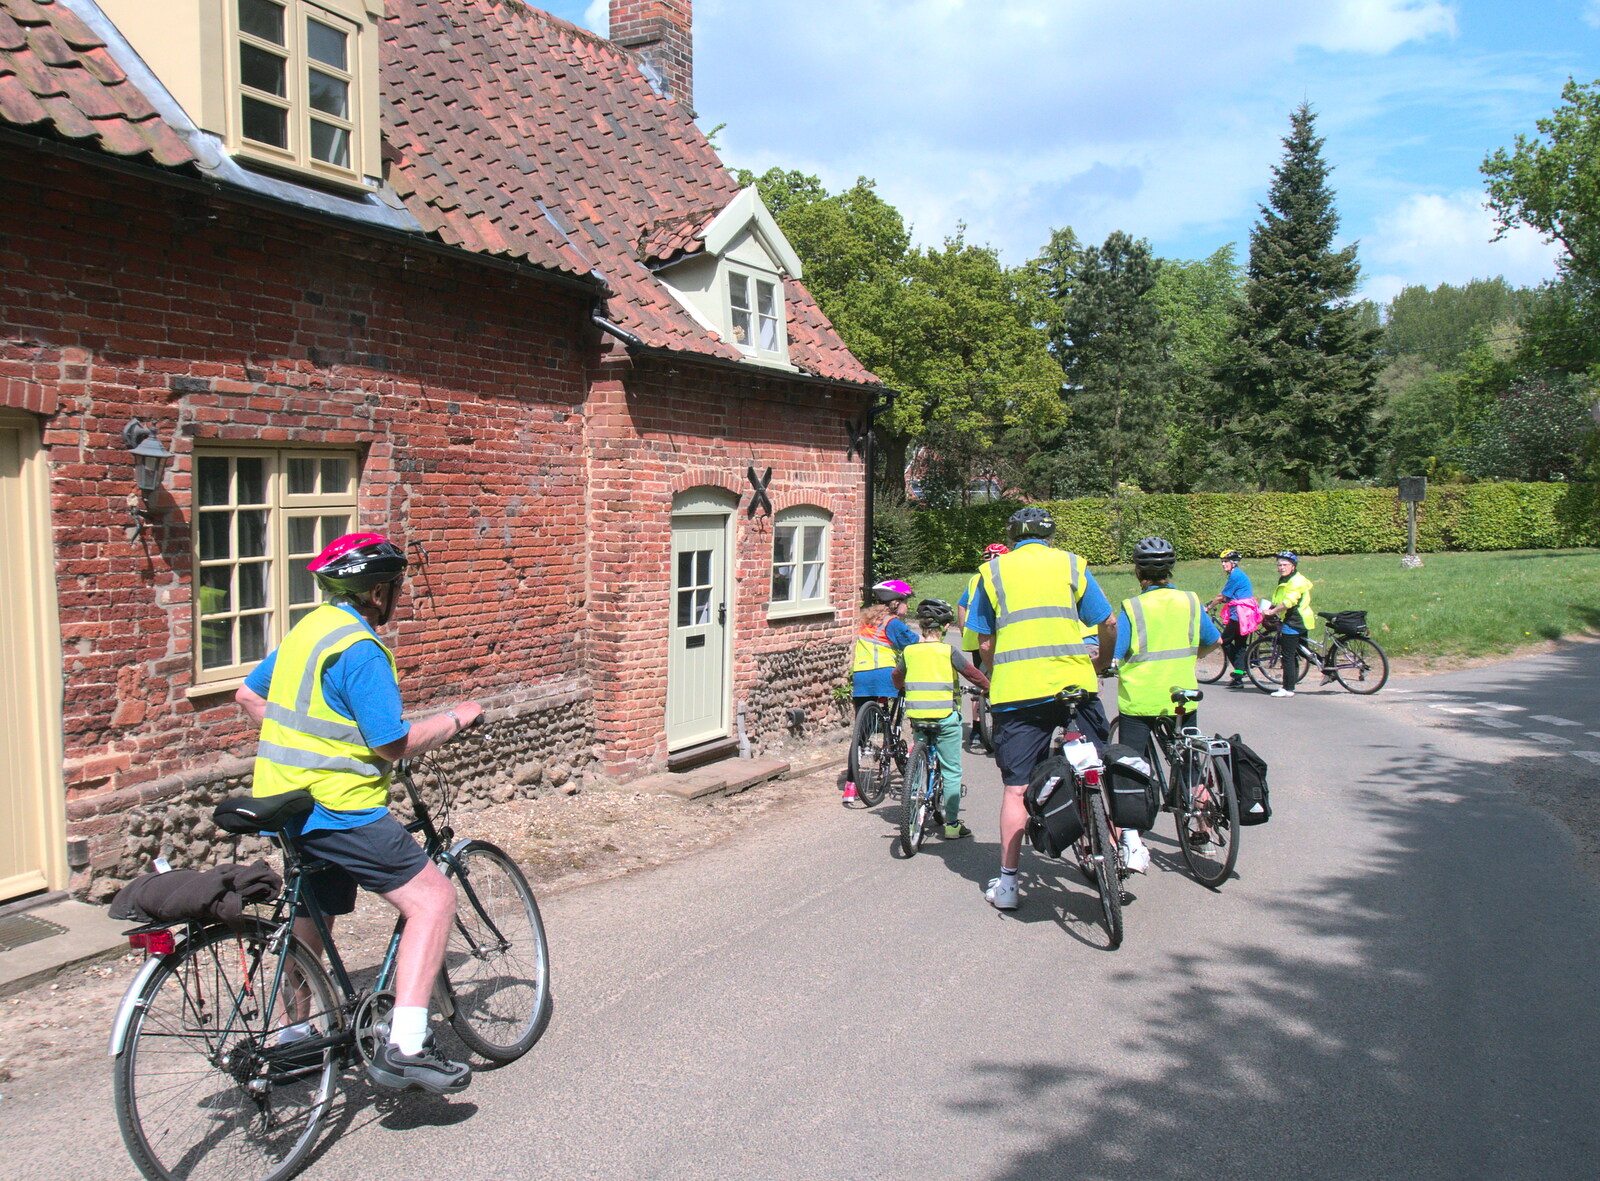 A pause to re-group in a pretty village from The BSCC Weekend Away, Holt, Norfolk - 12th May 2018